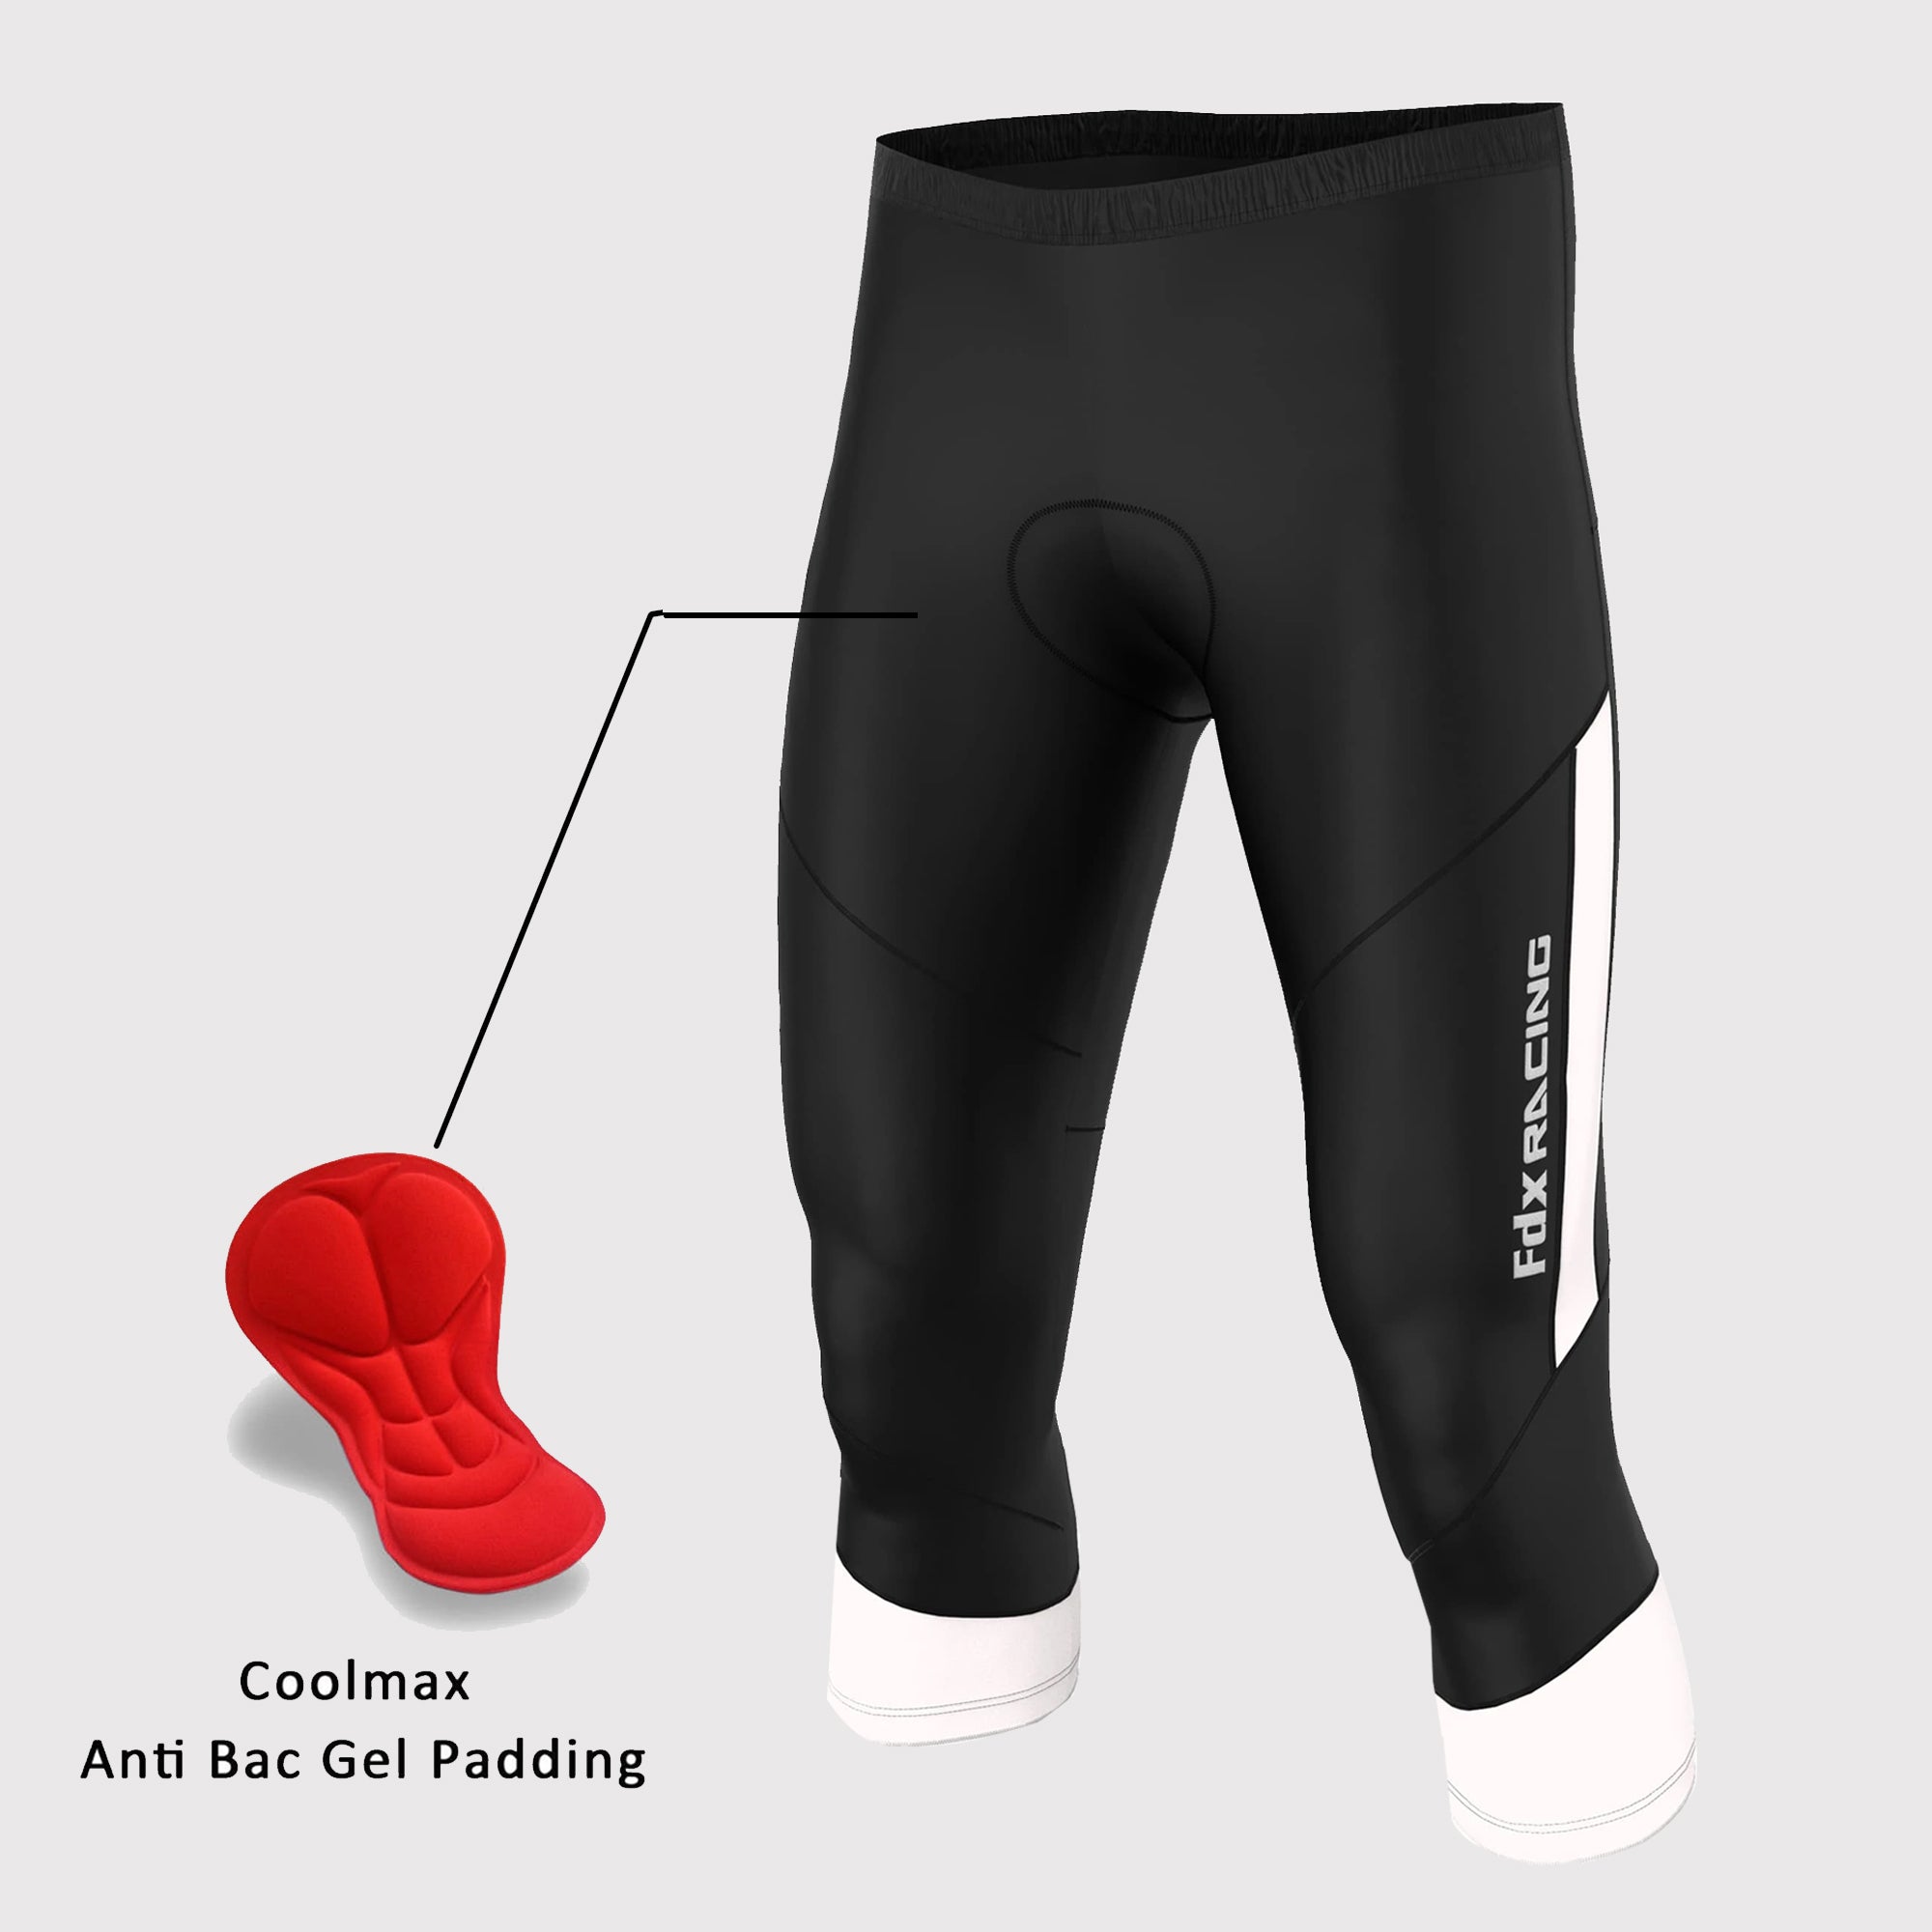 Fdx Mens Black & White Gel Padded 3/4 Cycling Shorts for Summer Best Outdoor Knickers Road Bike Short Length Pants - Gallop